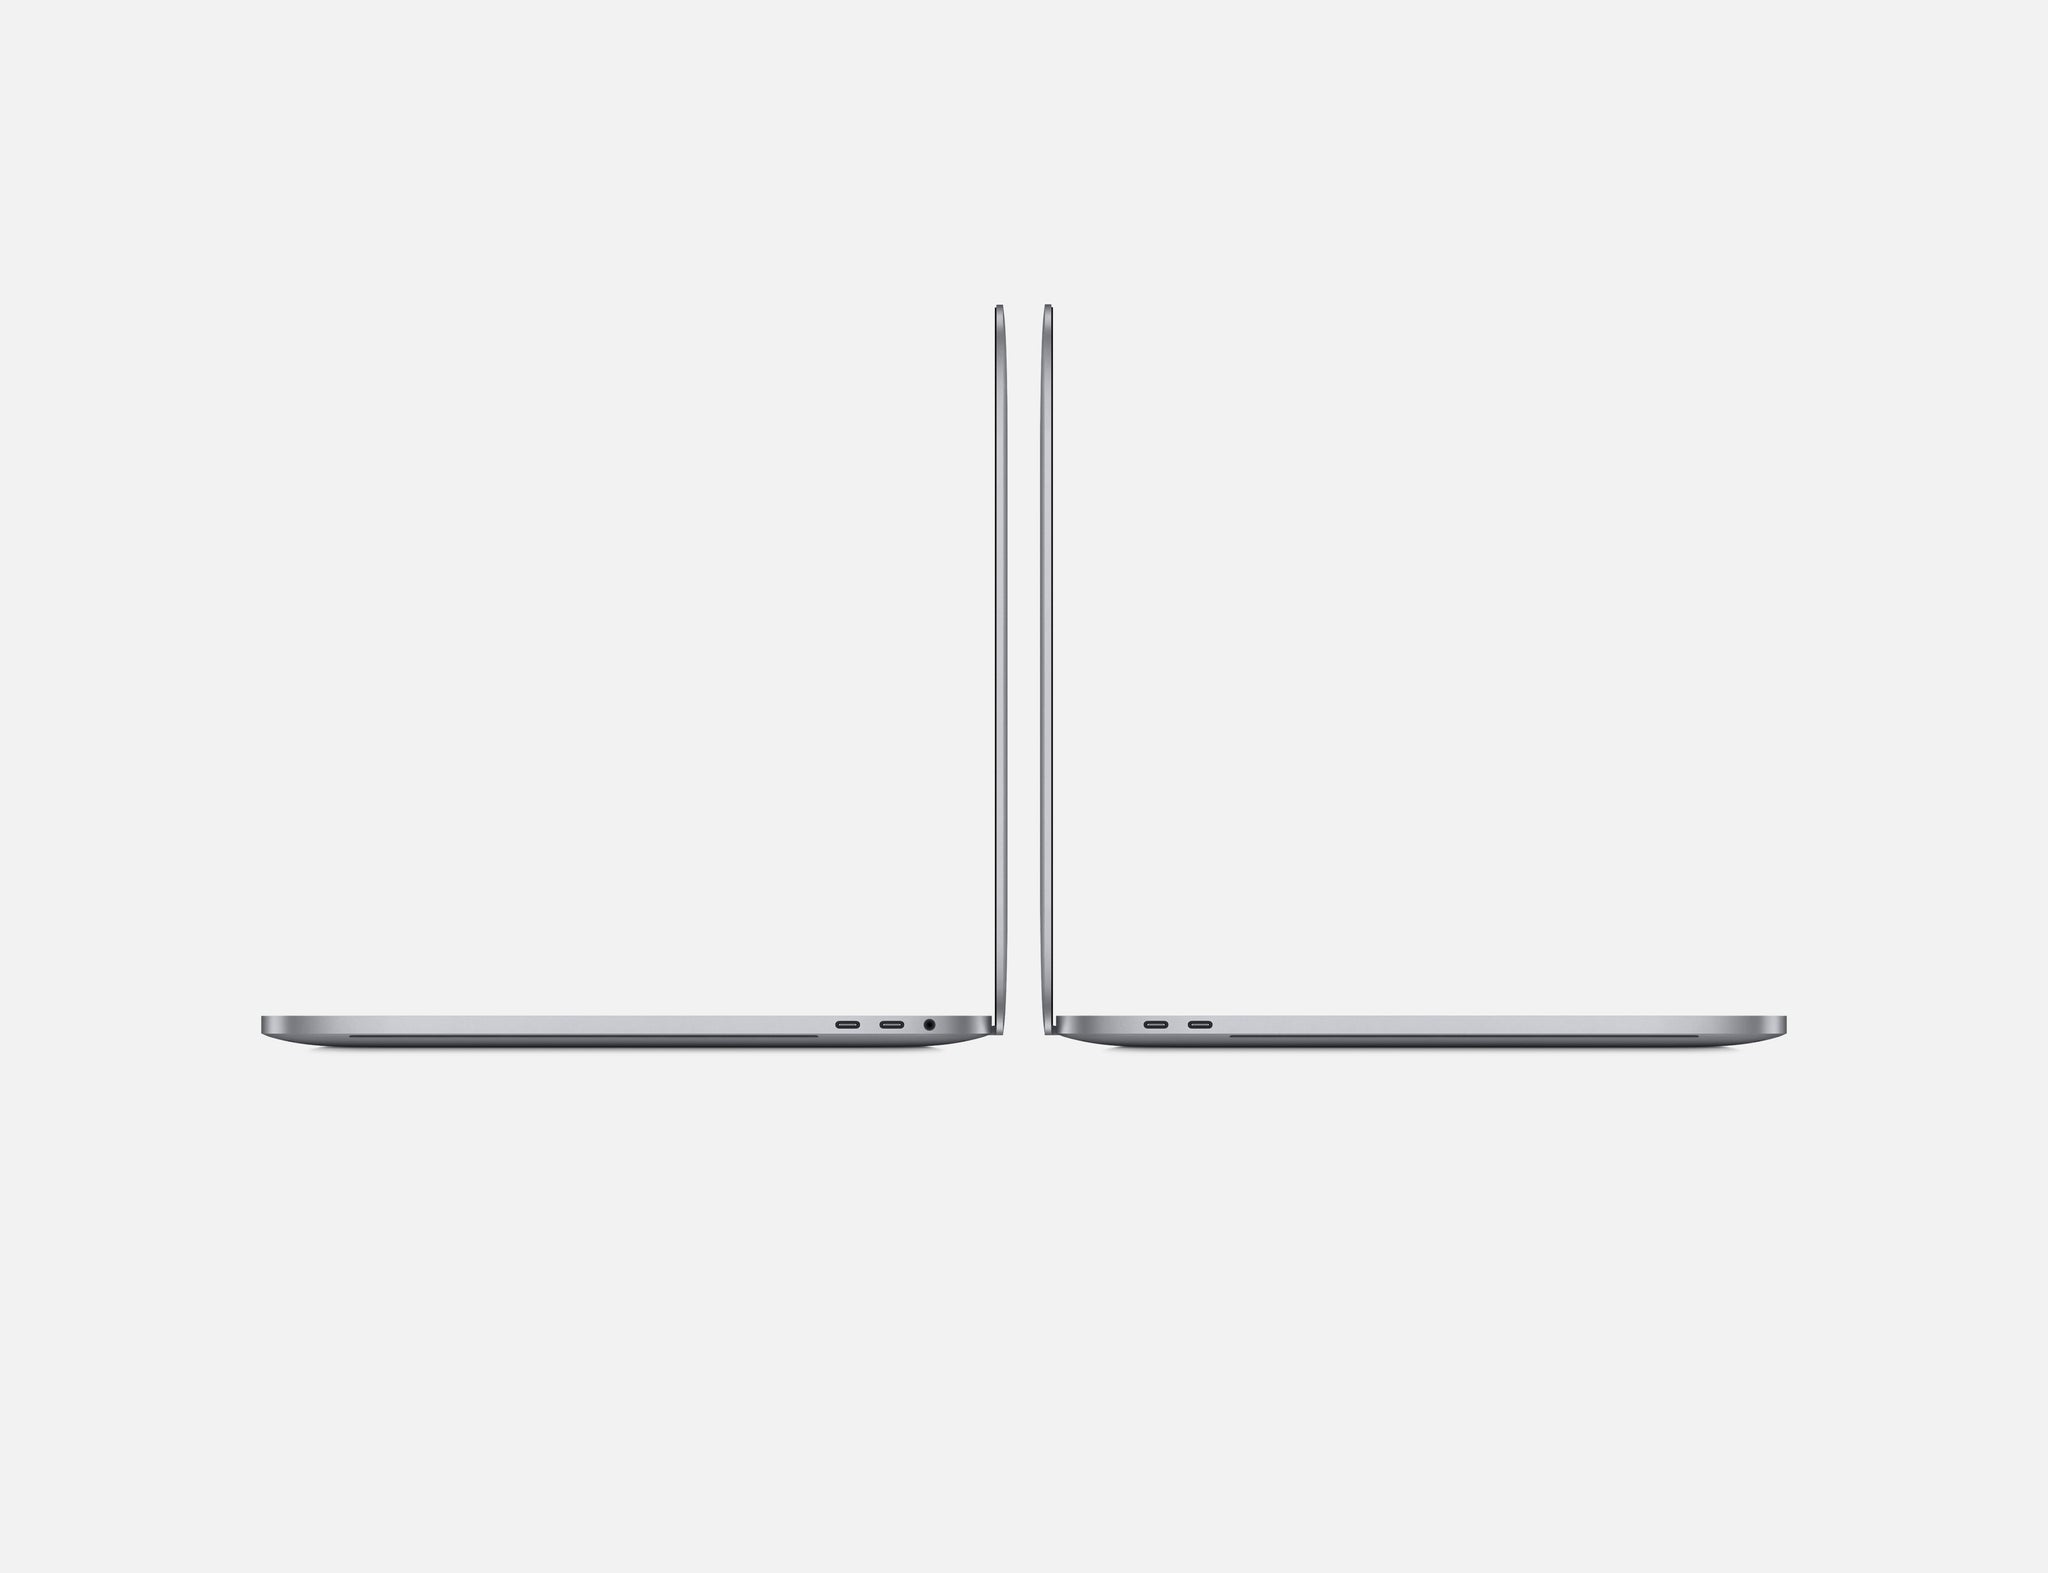 Apple MacBook Pro 16" with Touch Bar,9th-Gen 6-Core Intel Core i7 2.6GHz,32GB RAM,512GBSSD,Late 2019